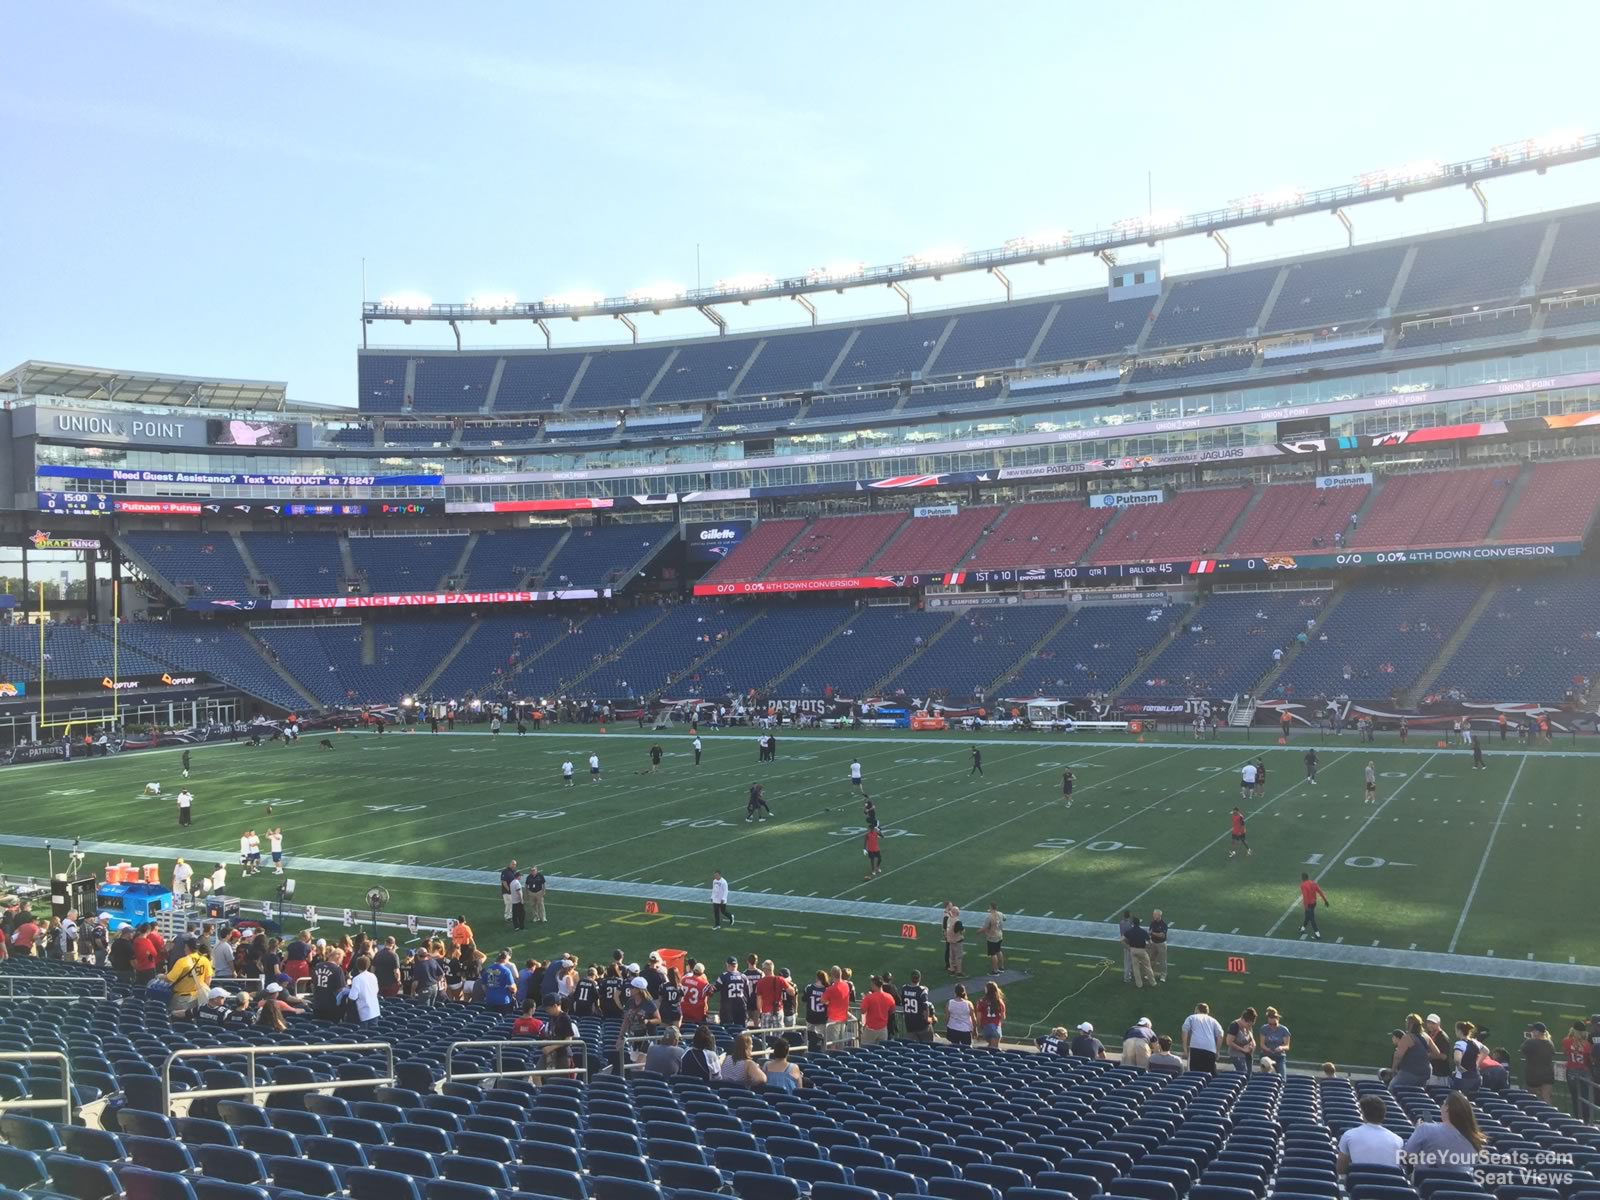 section 106, row 29 seat view  for football - gillette stadium